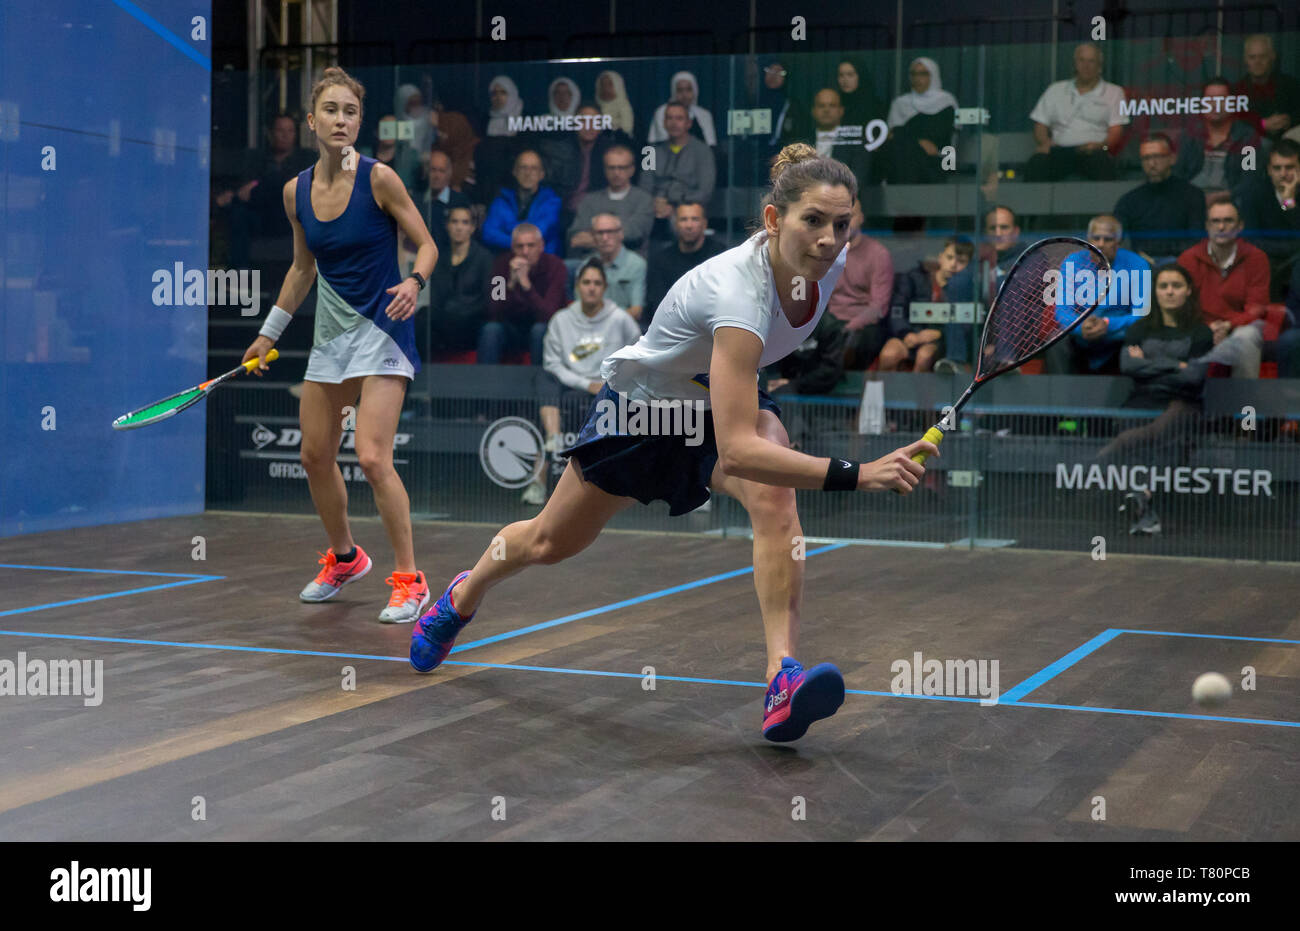 National Squash Centre, Manchester, UK. 10th 2019. Manchester Open Squash championships, day 2; Joelle King (NZL) right in her second round match against Nele Gilis (BEL) Credit: Action Plus Sports/Alamy Live